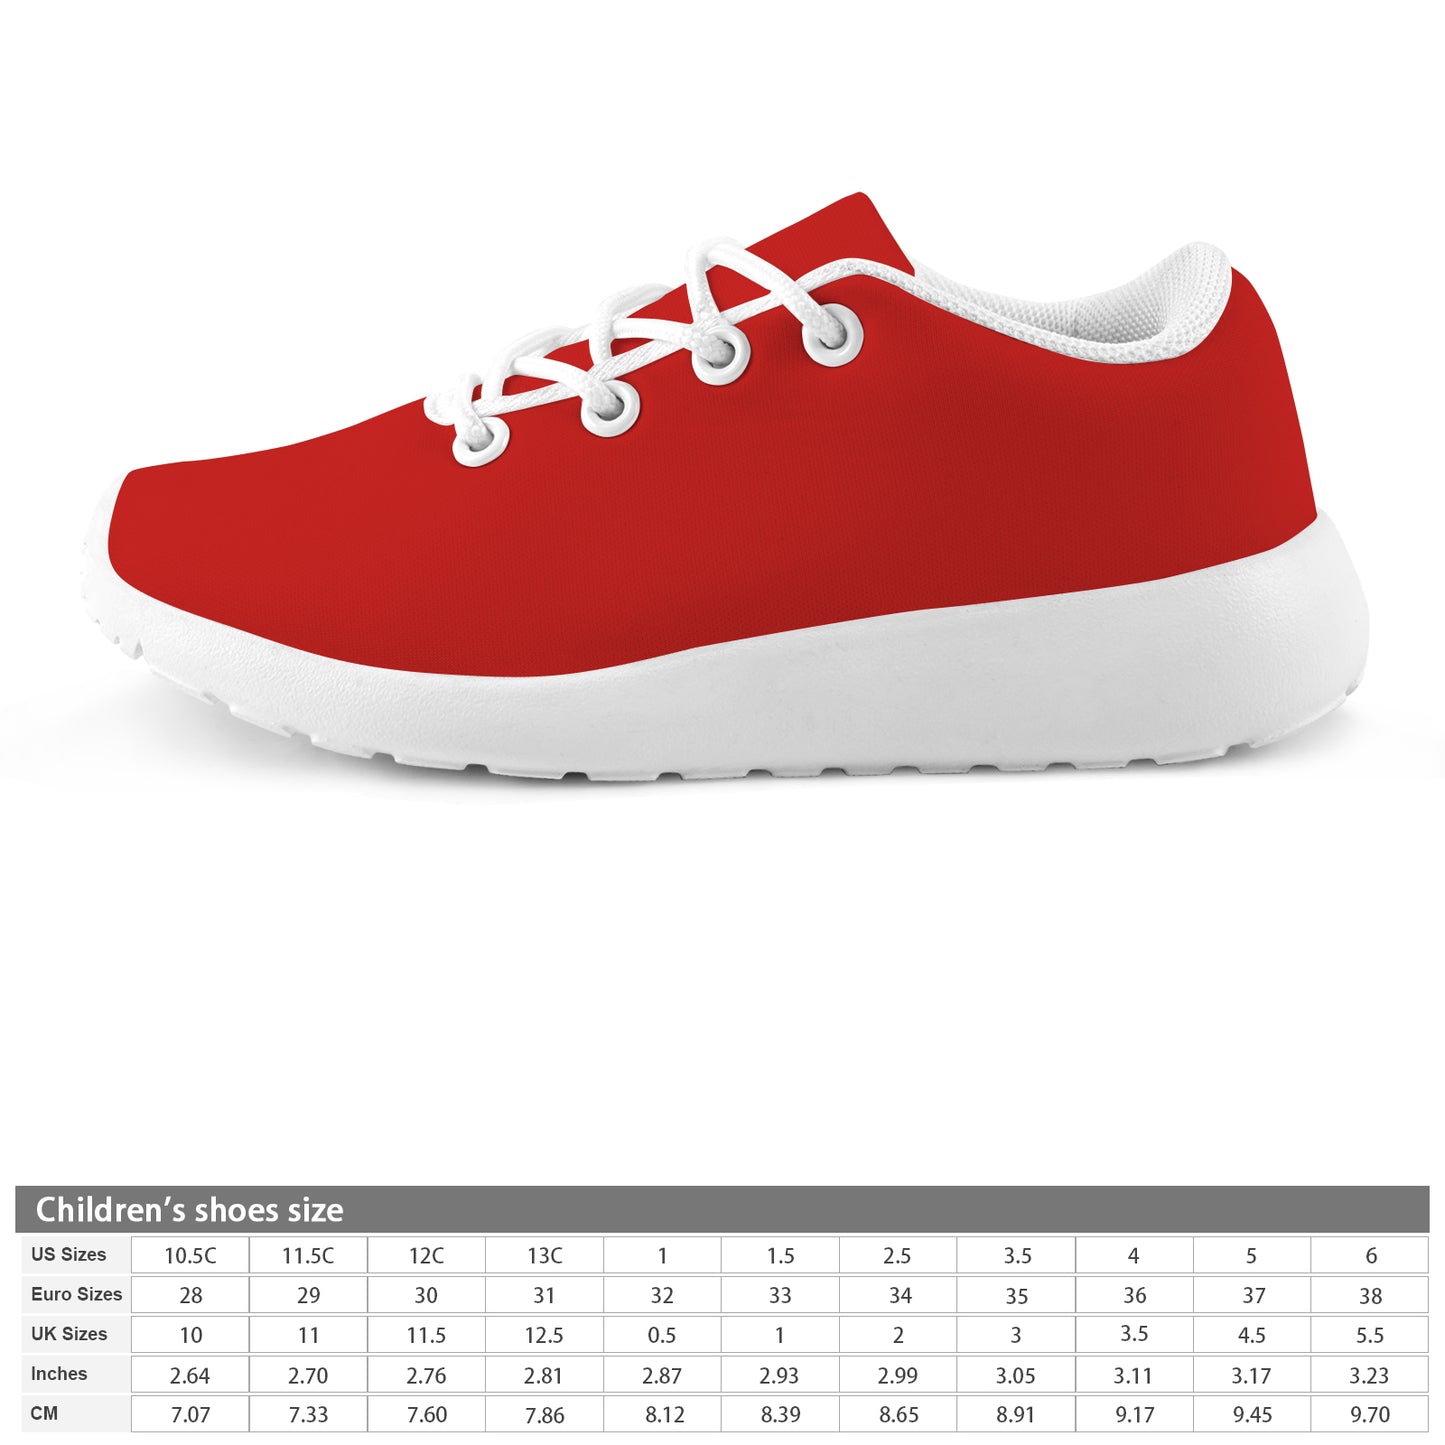 Kid's Sneakers - Classic Red